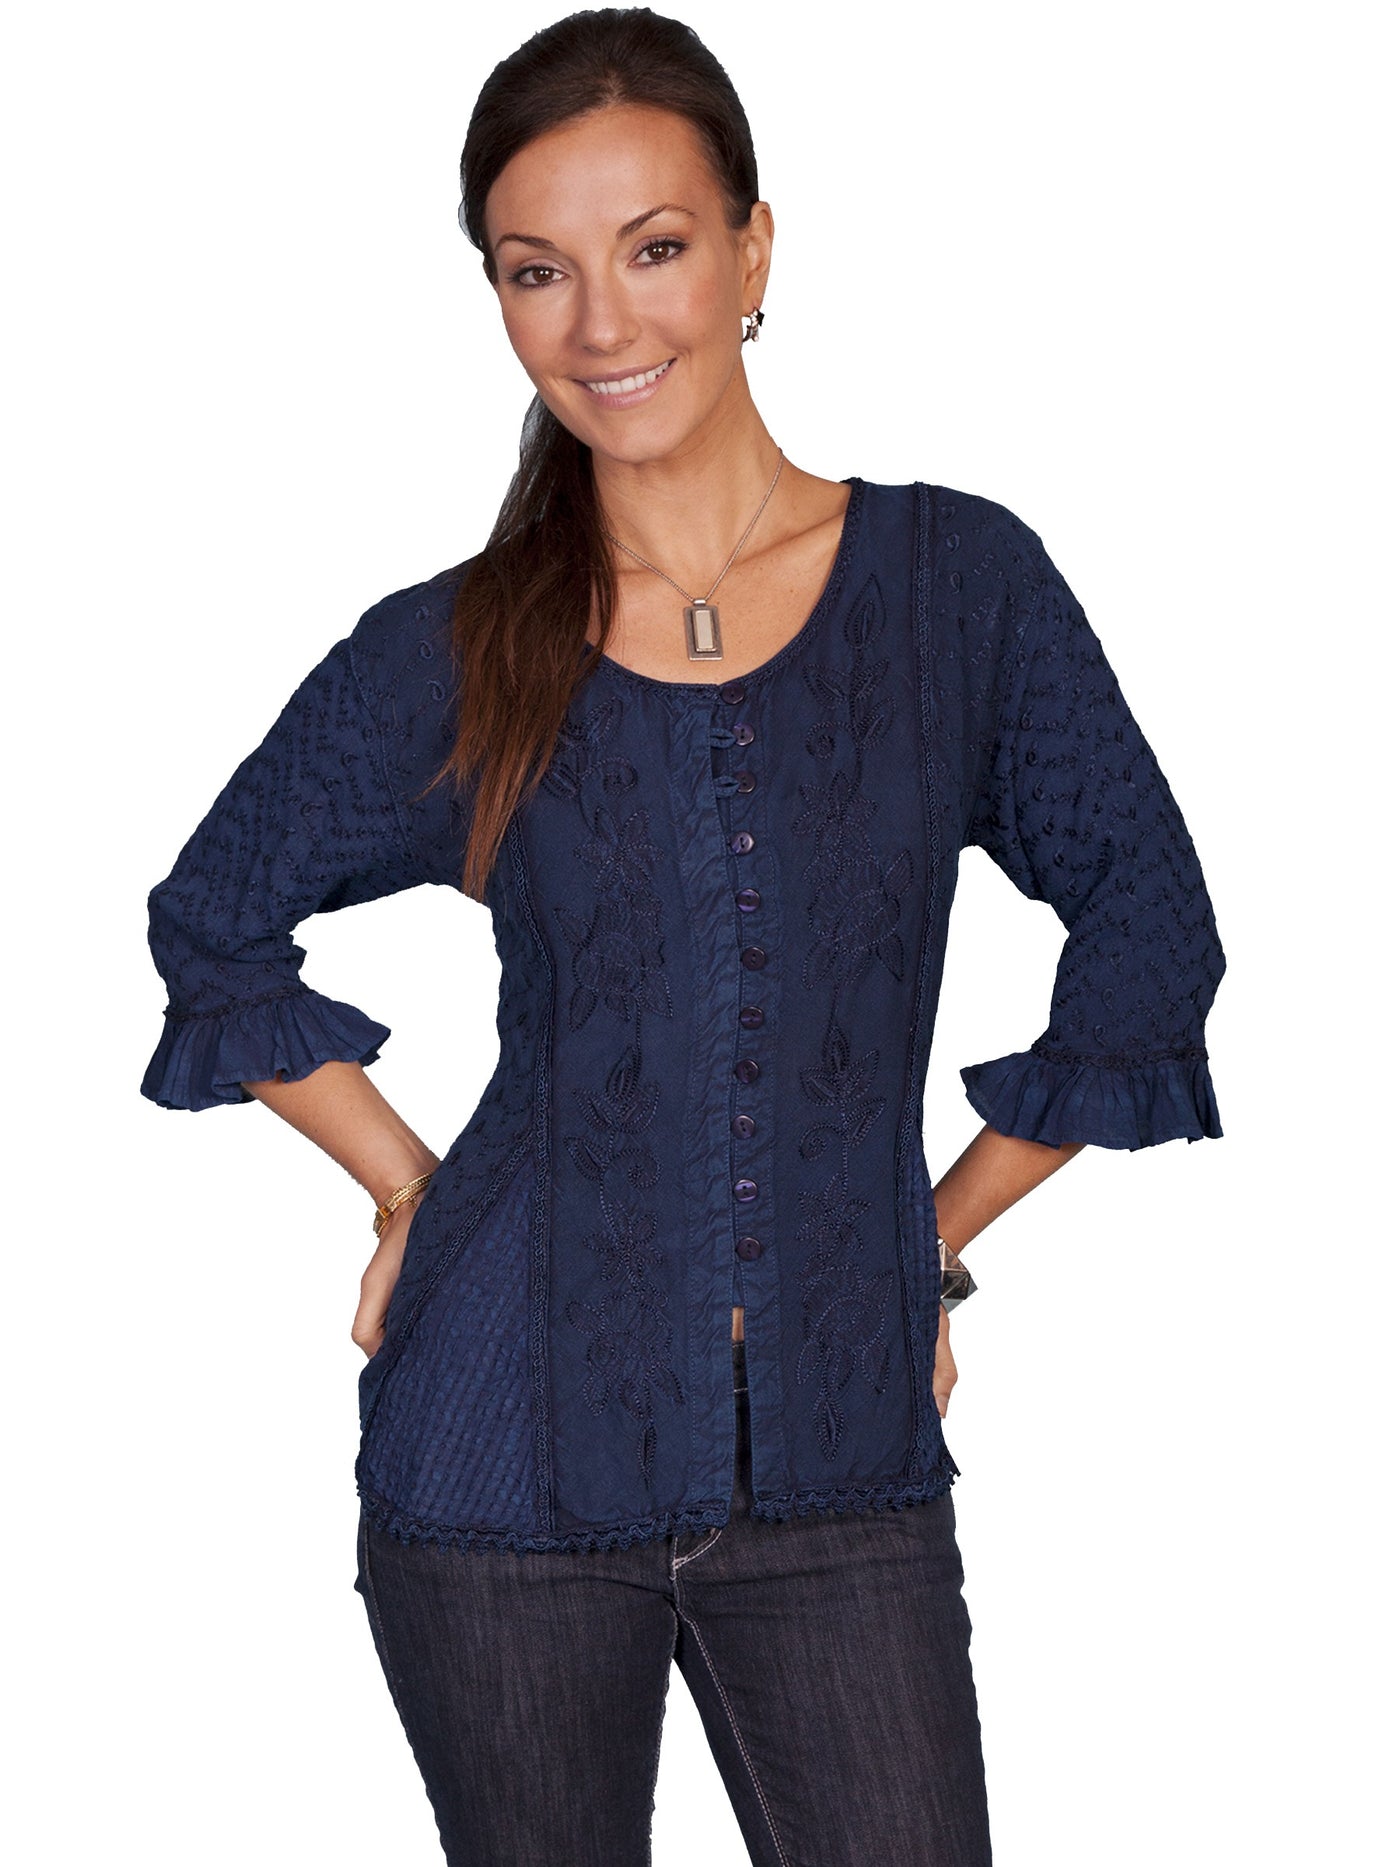 Cowgirl Multi-Fabric Blouse in Blue - SOLD OUT